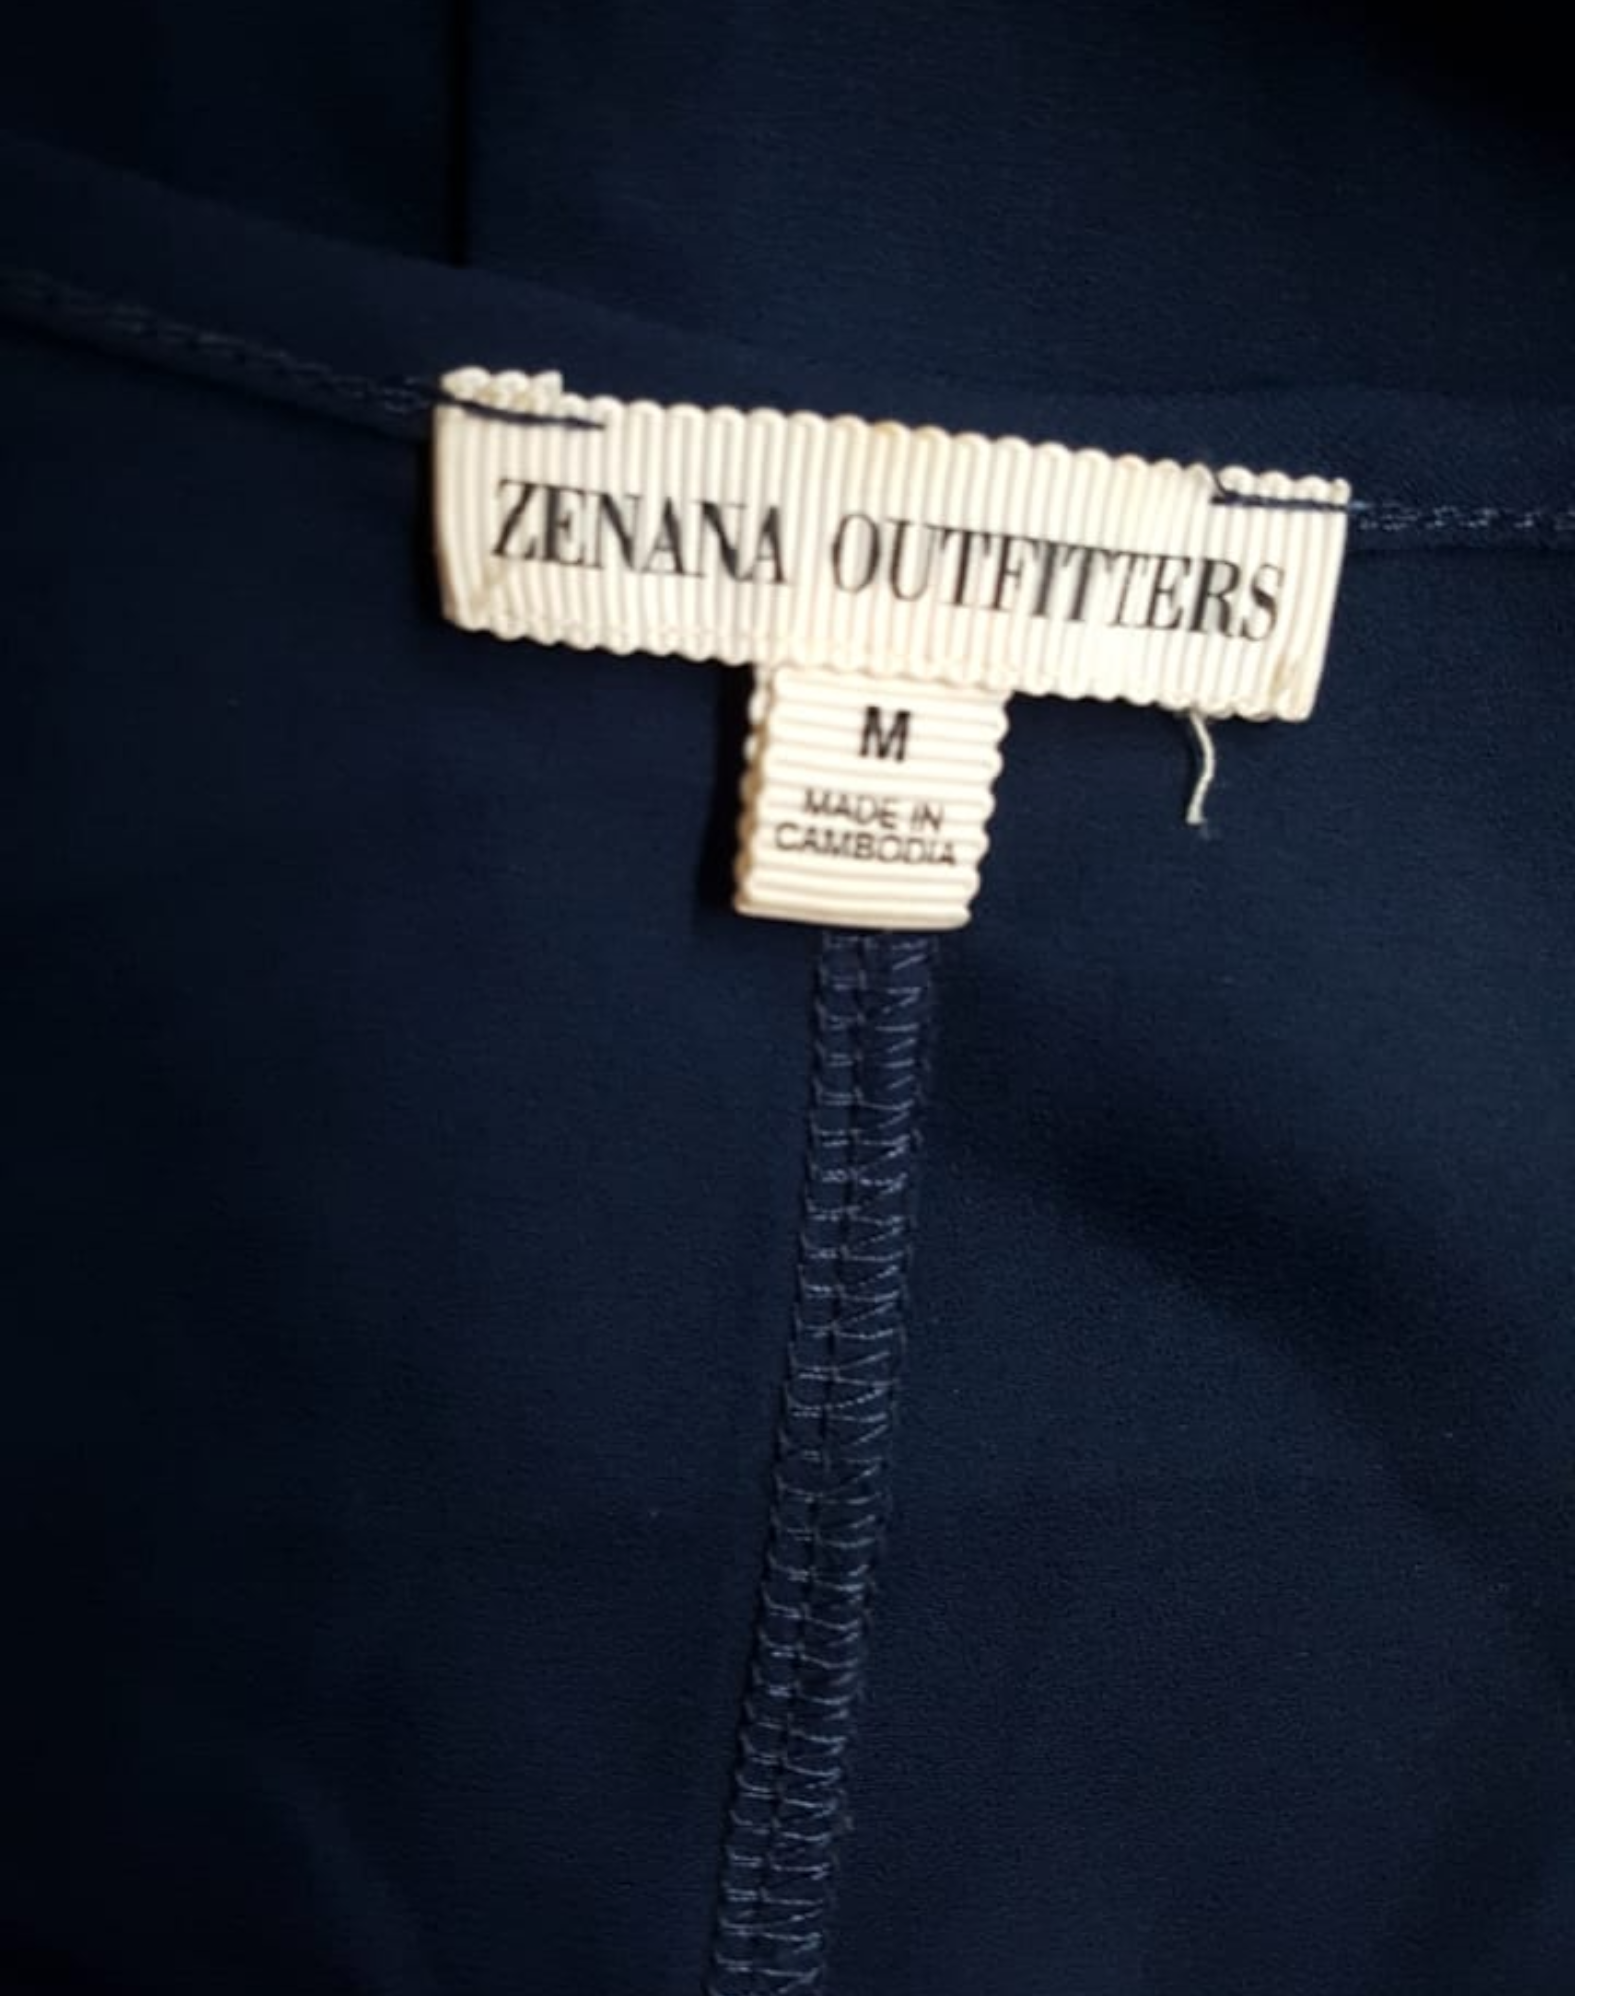 Blusas Casuales Zenana outfitters